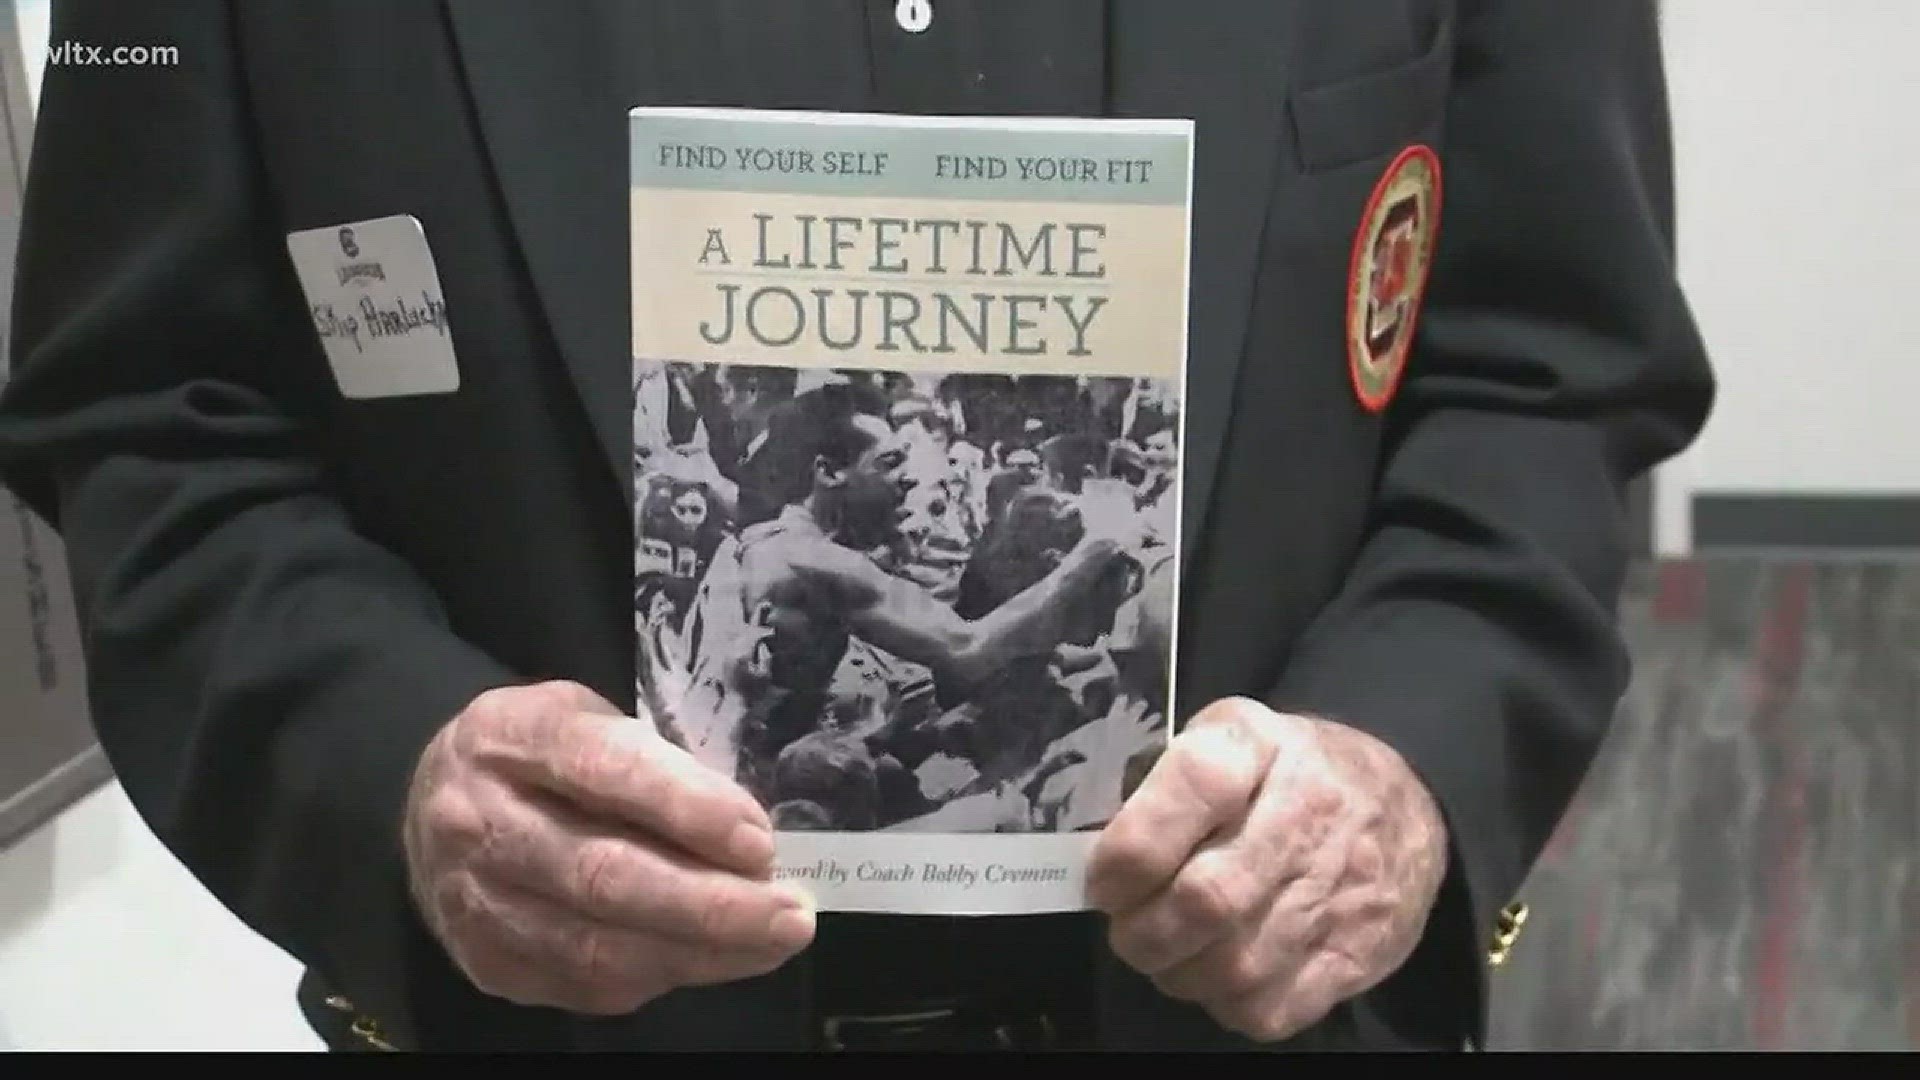 Skip Harlicka has a host of life experiences that he has put down in print in an effort to help up and coming athletes.